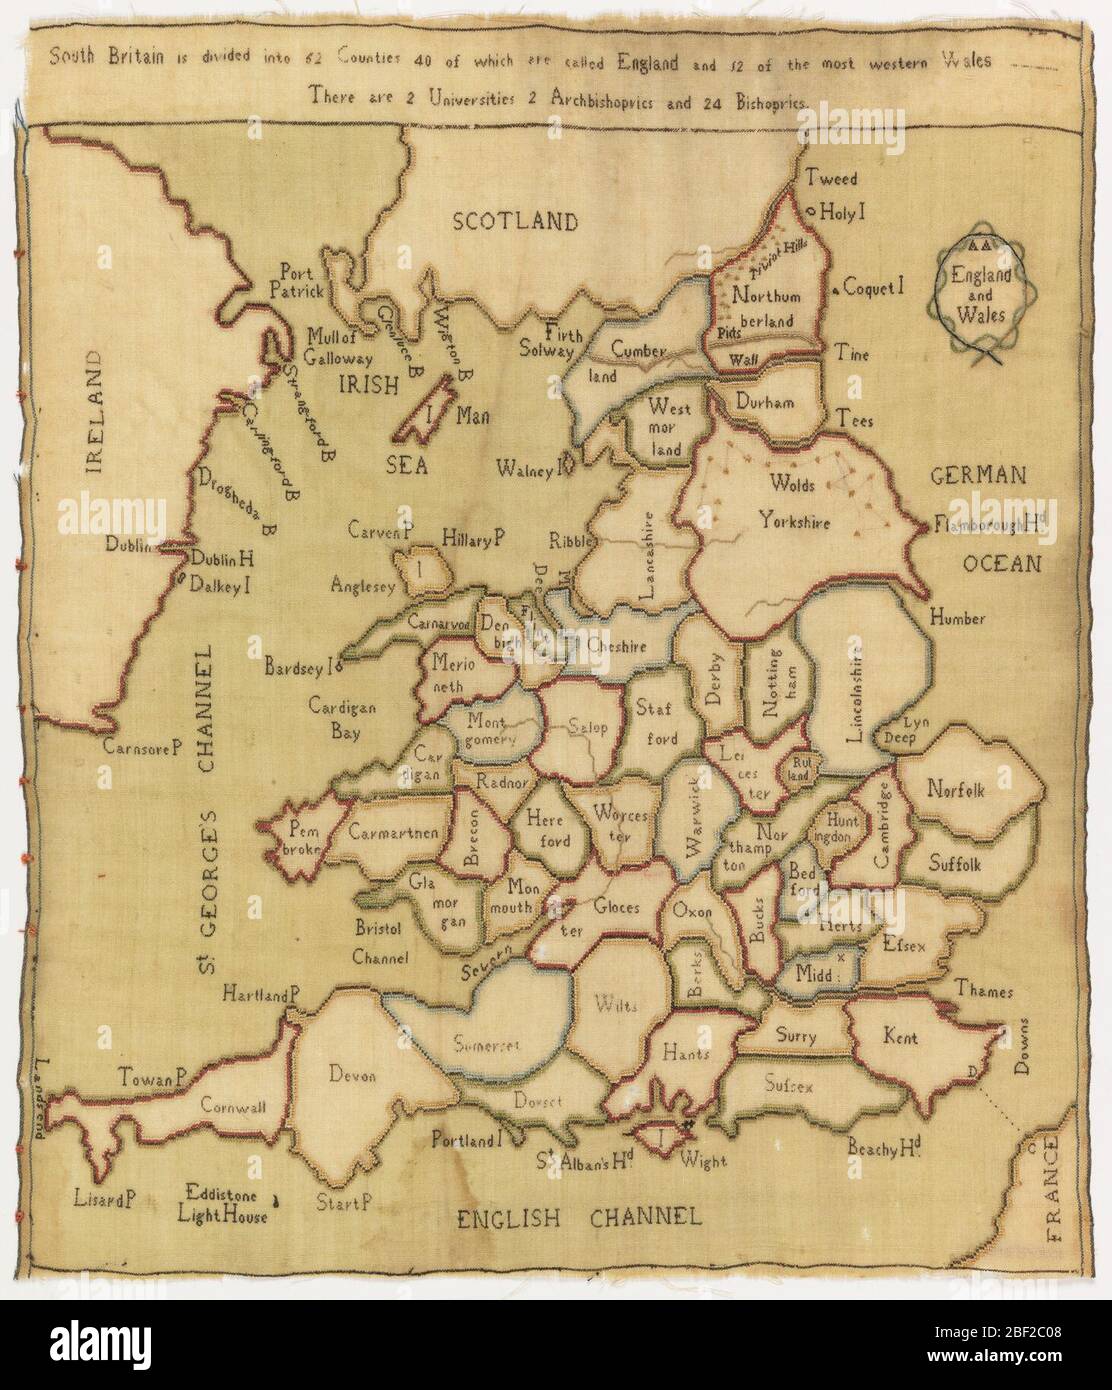 Map sampler. Map showing all the countries of England and Wales, with portions of Scotland, Ireland and France. Embroidered inscription at top: 'South Britain is divided into 62 counties 40 of which are called England and 12 of the most western Wales. Stock Photo